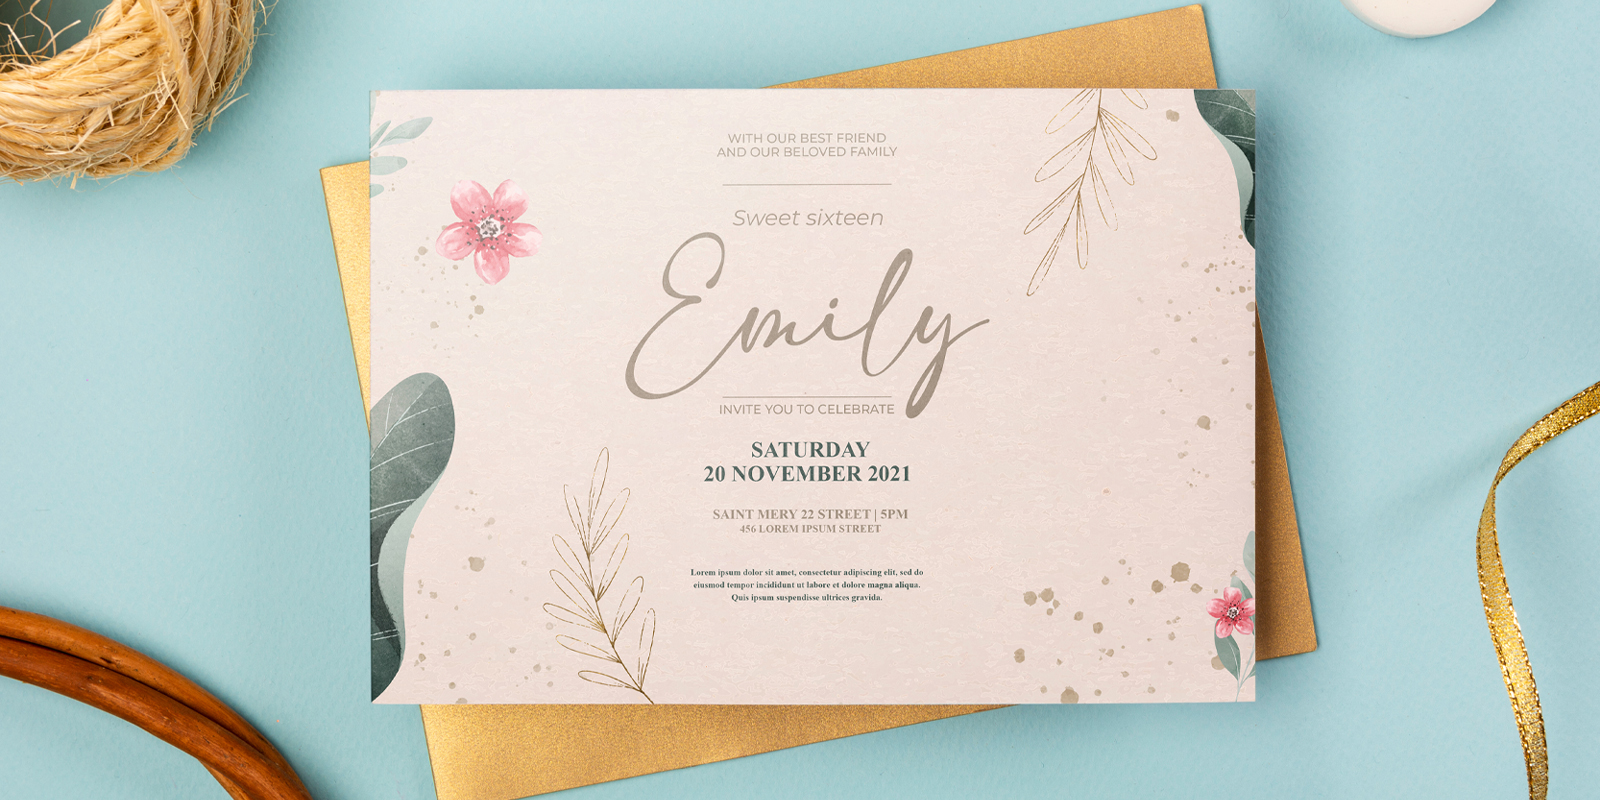 Invitations in Rockingham - Print with Pagerr